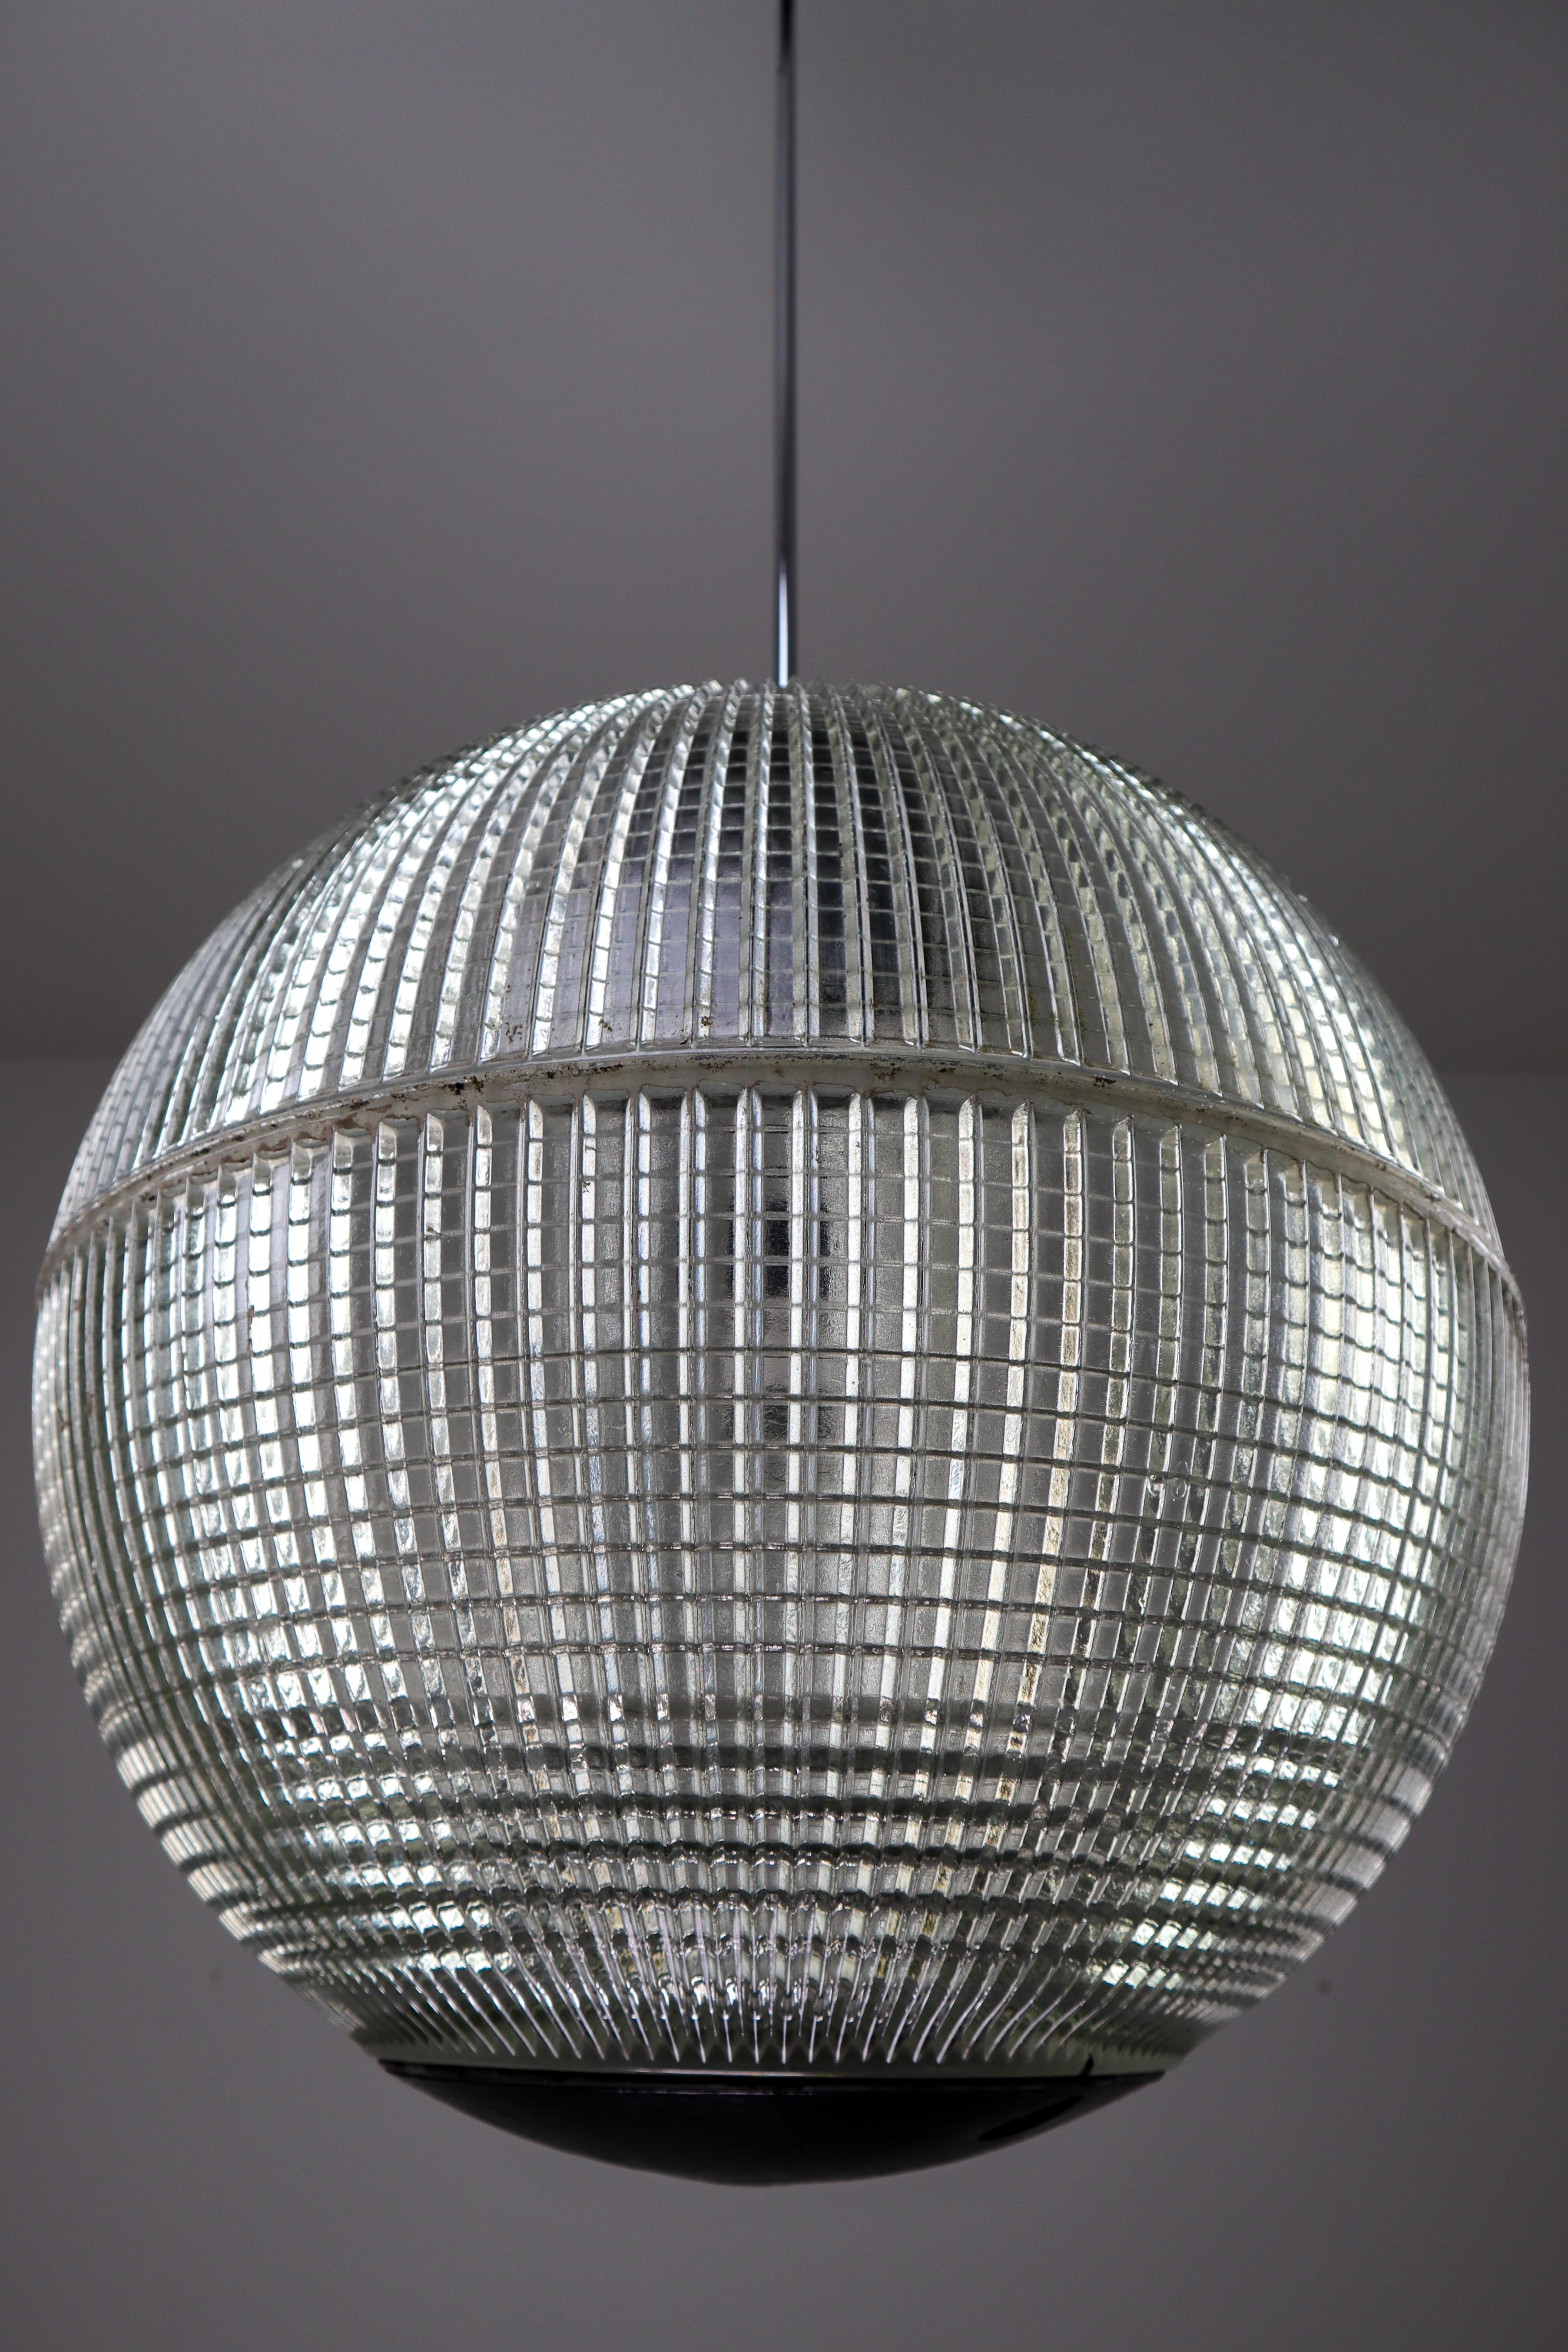 This is an original late 1960s Paris globe Holophane street light from Paris, France now turned into a pendant light. The hallmark of Holophane luminaries, or lighting fixtures, is the borosilicate glass reflector / refactor. The glass prisms (ribs)